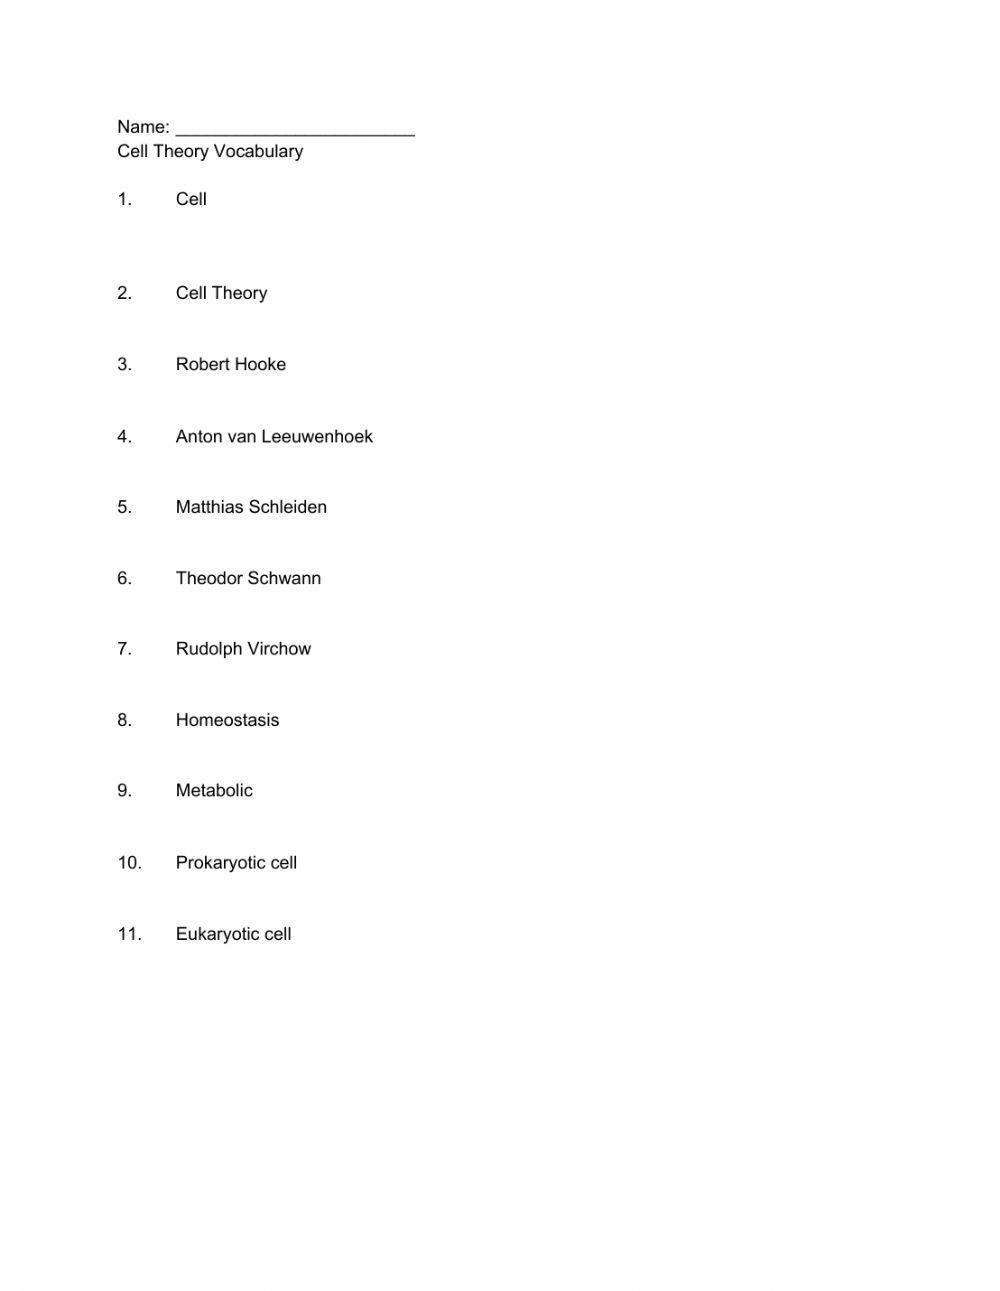 Cell Theory Vocabulary List